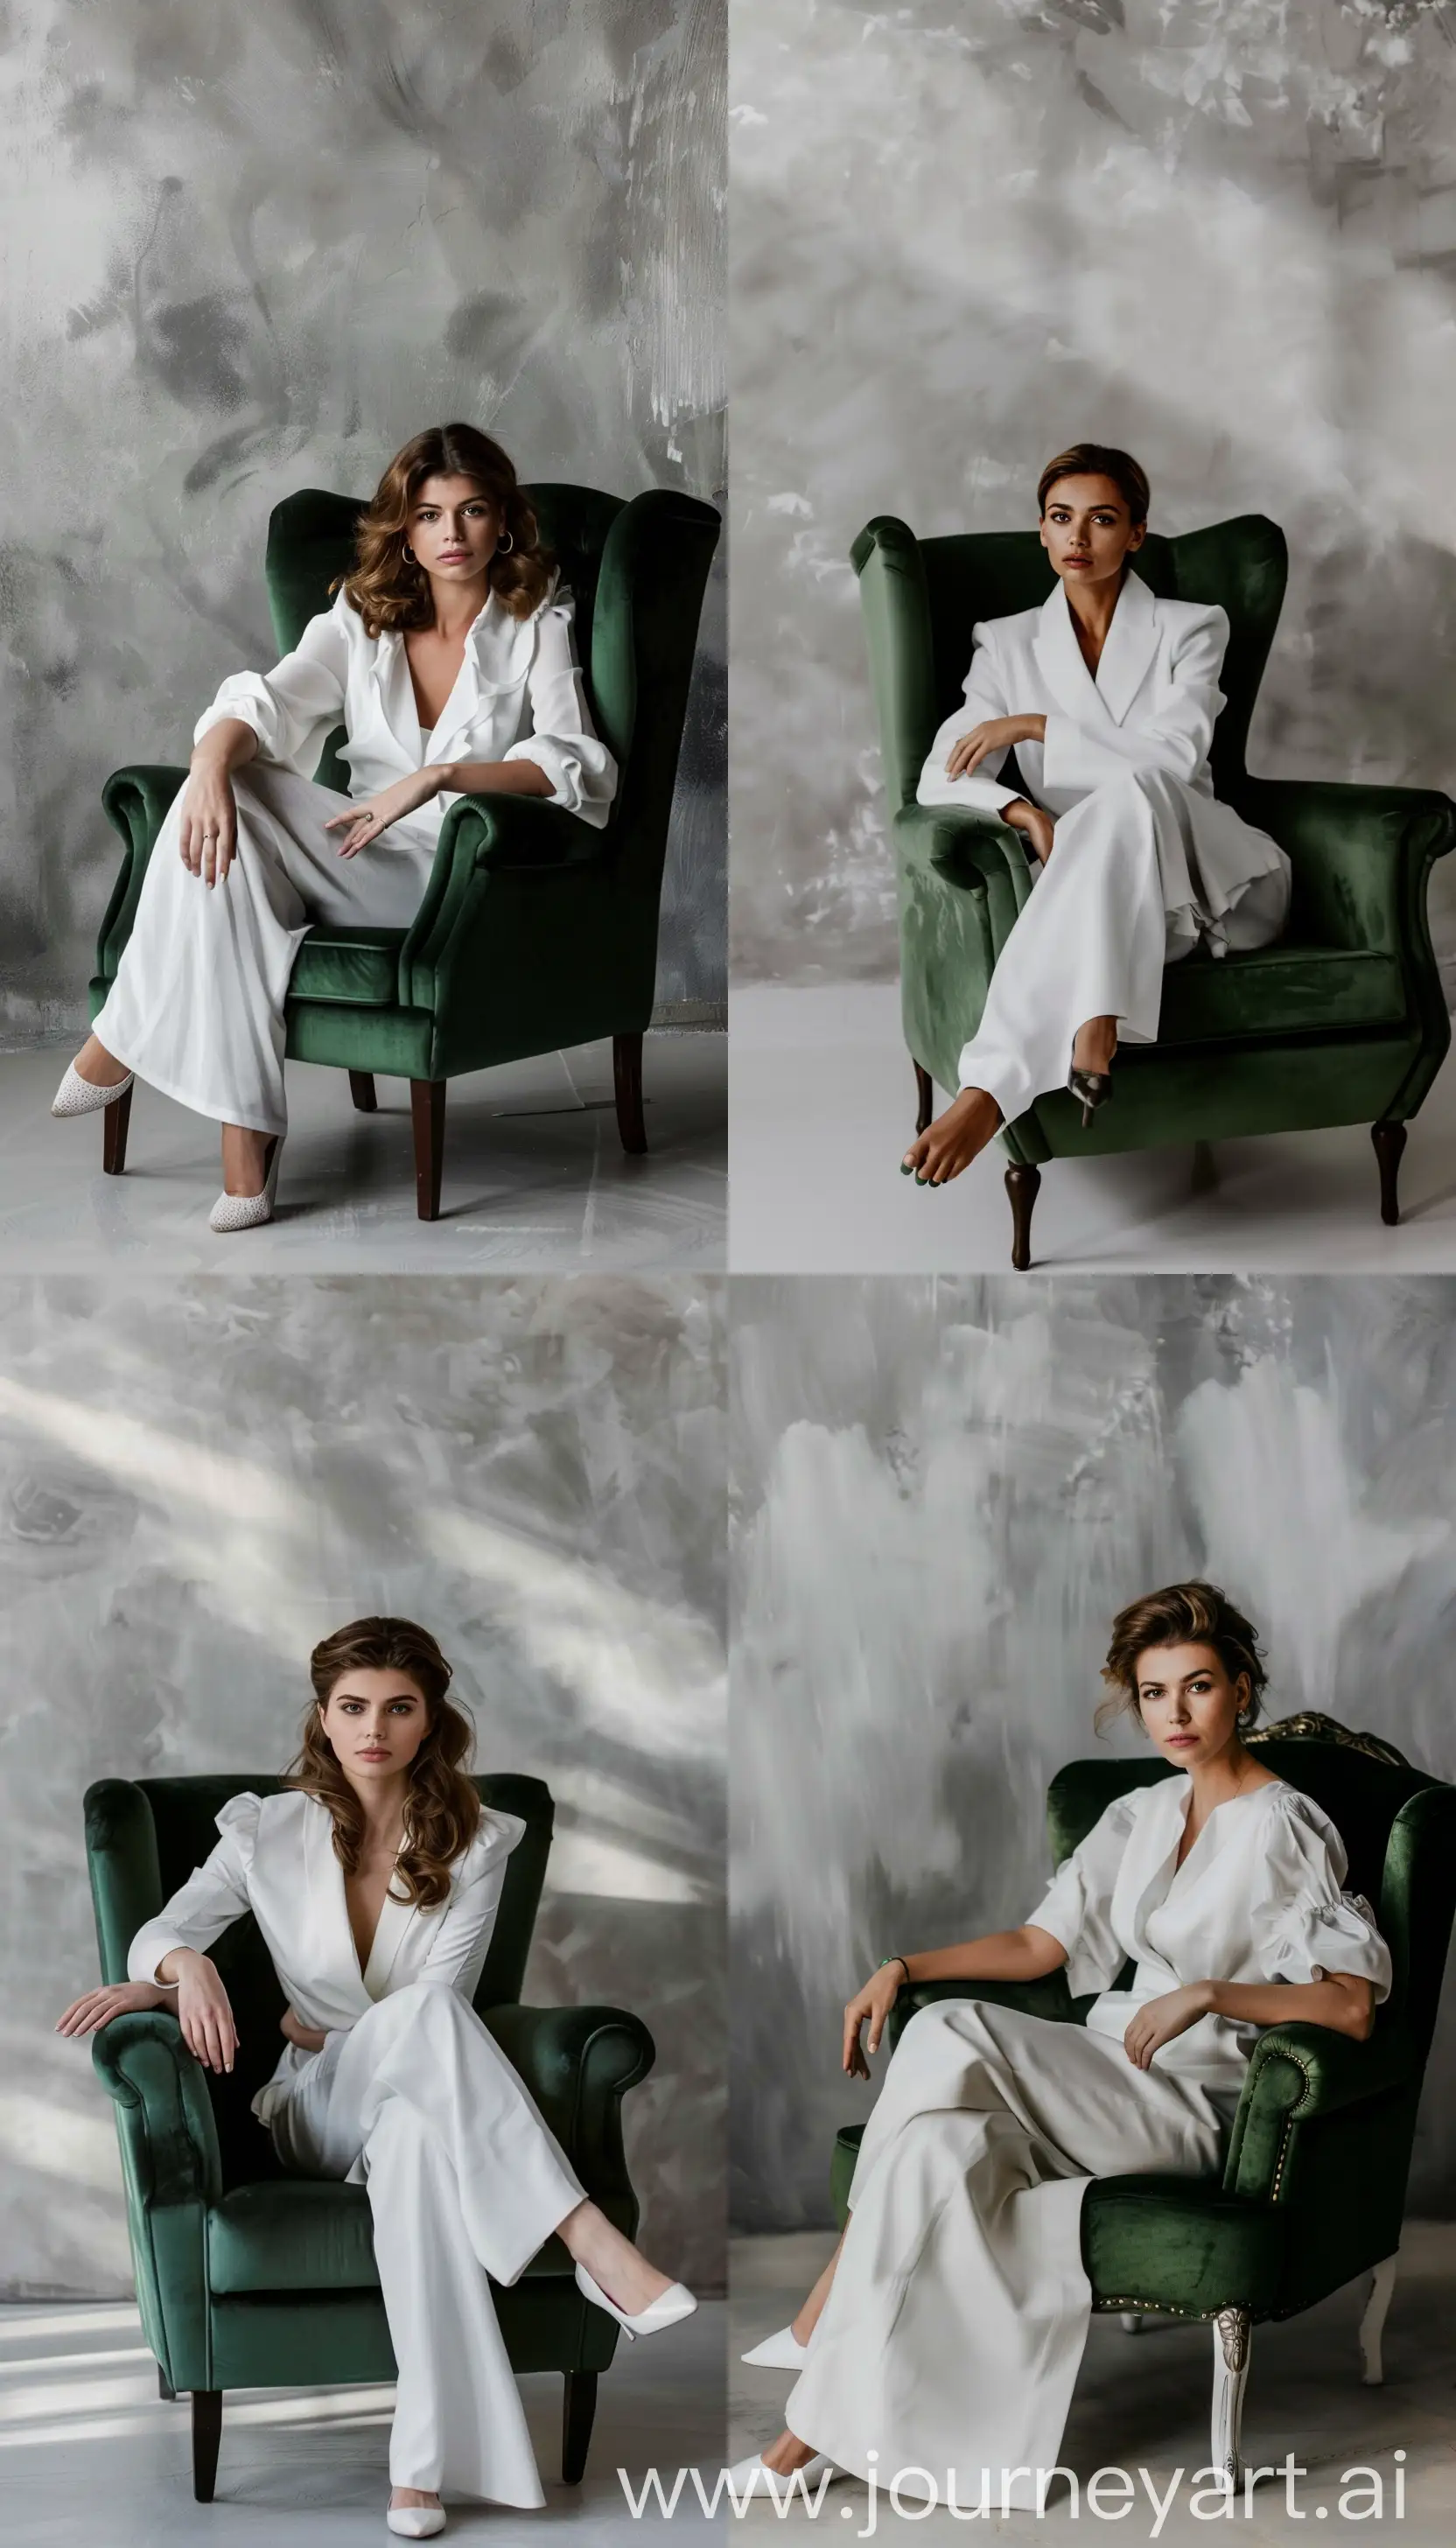 Elegant-Woman-in-White-Graceful-Pose-in-Stylish-Green-Armchair